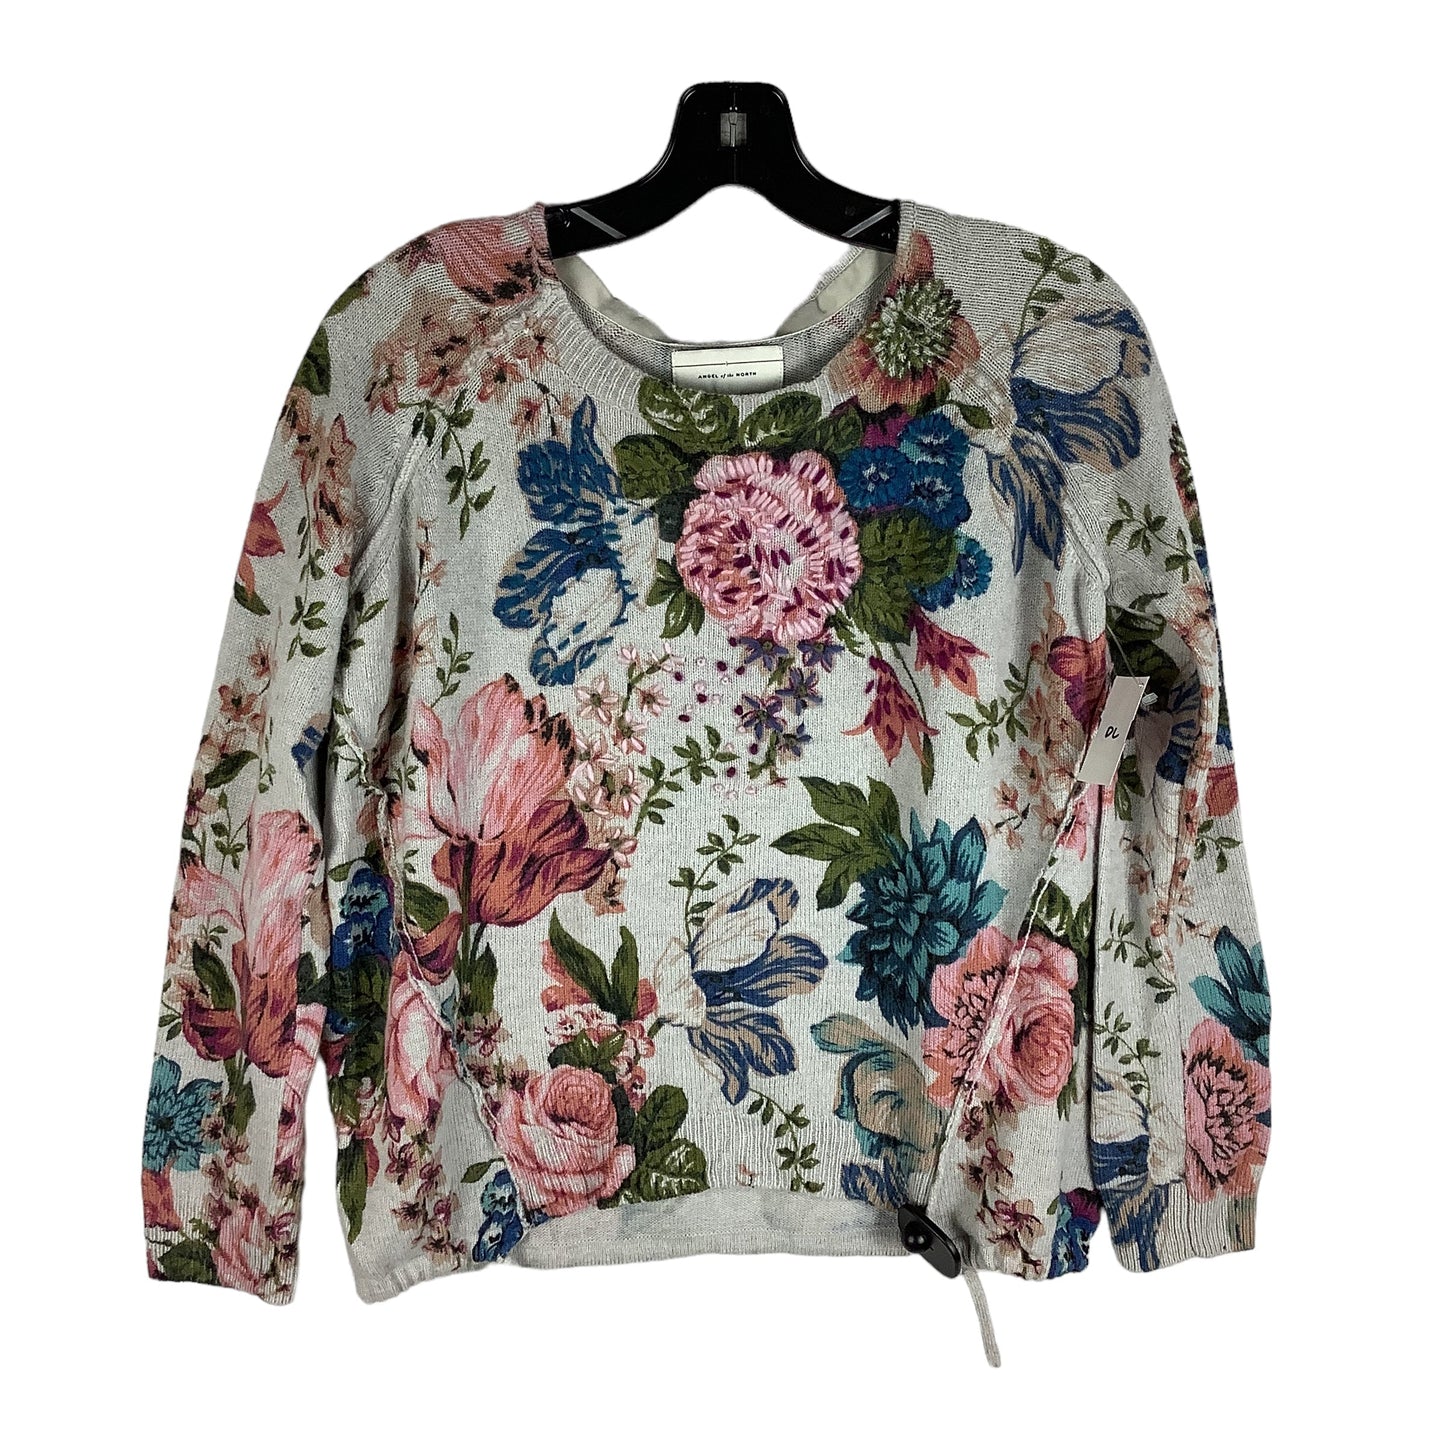 Floral Print Sweater Anthropologie, Size Xs